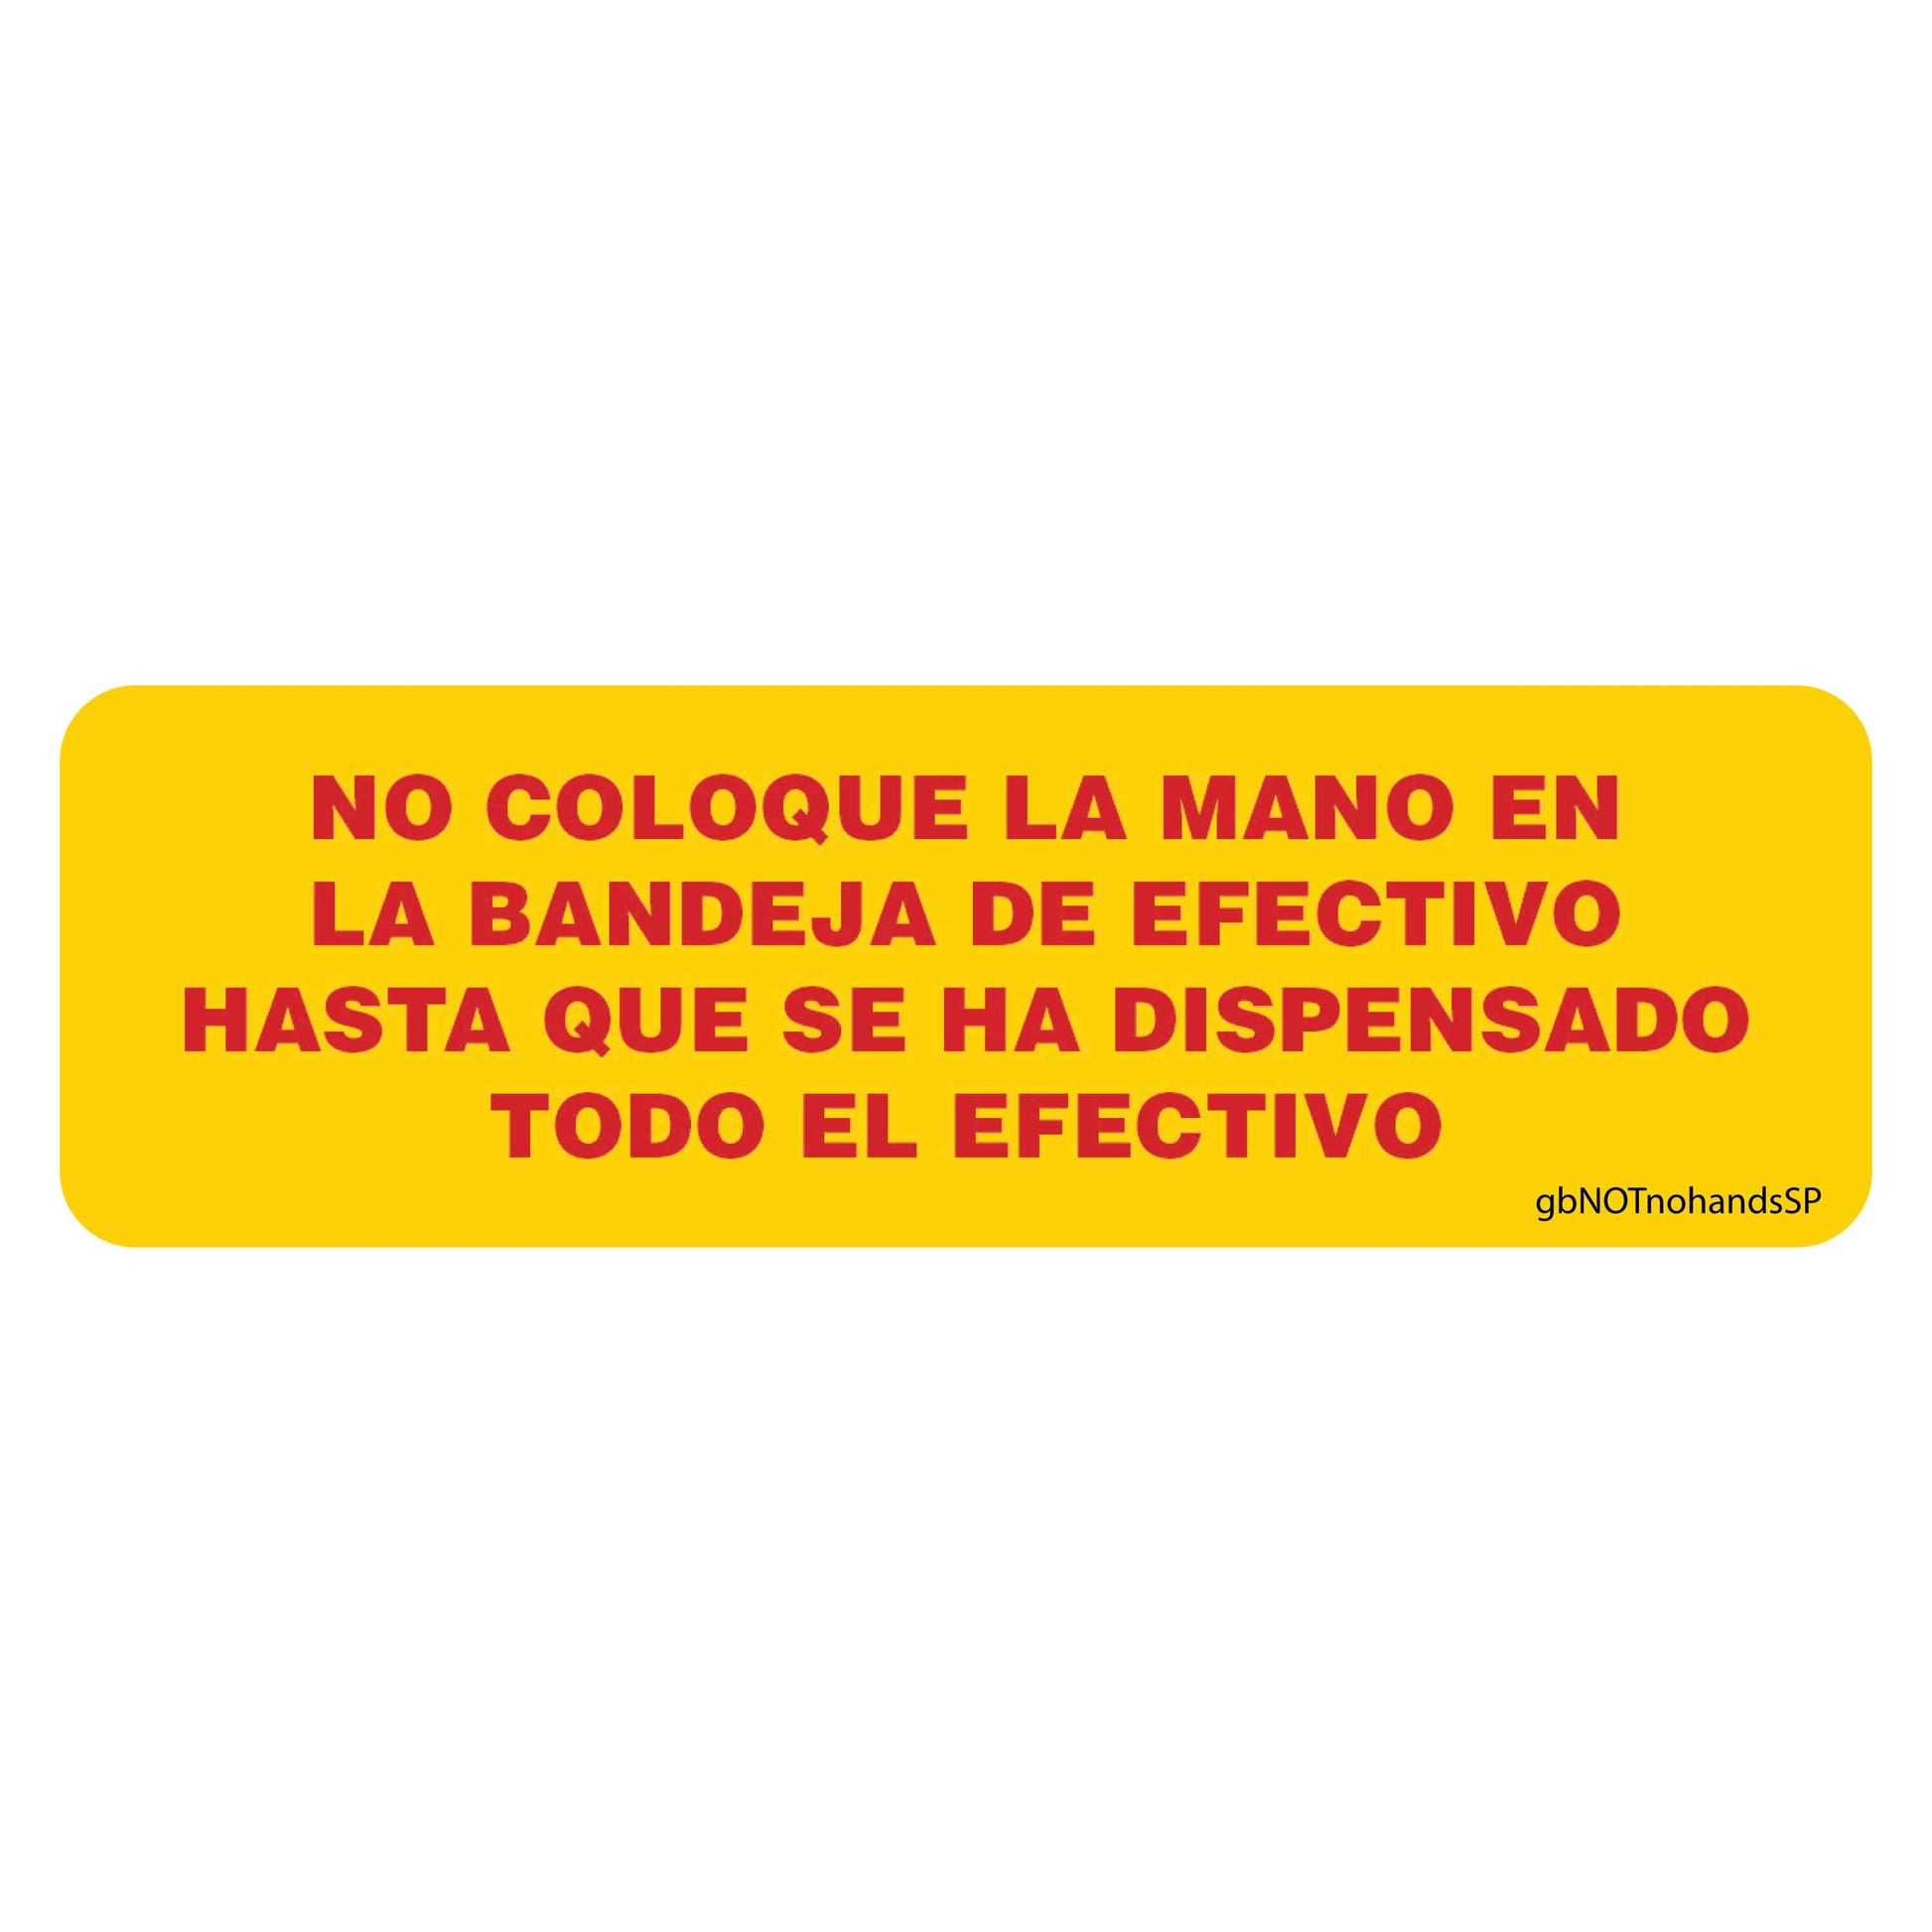 Do No Place Hand into Cash Tray Decal in Spanish. 4 inches by 1.25 inches in size. 